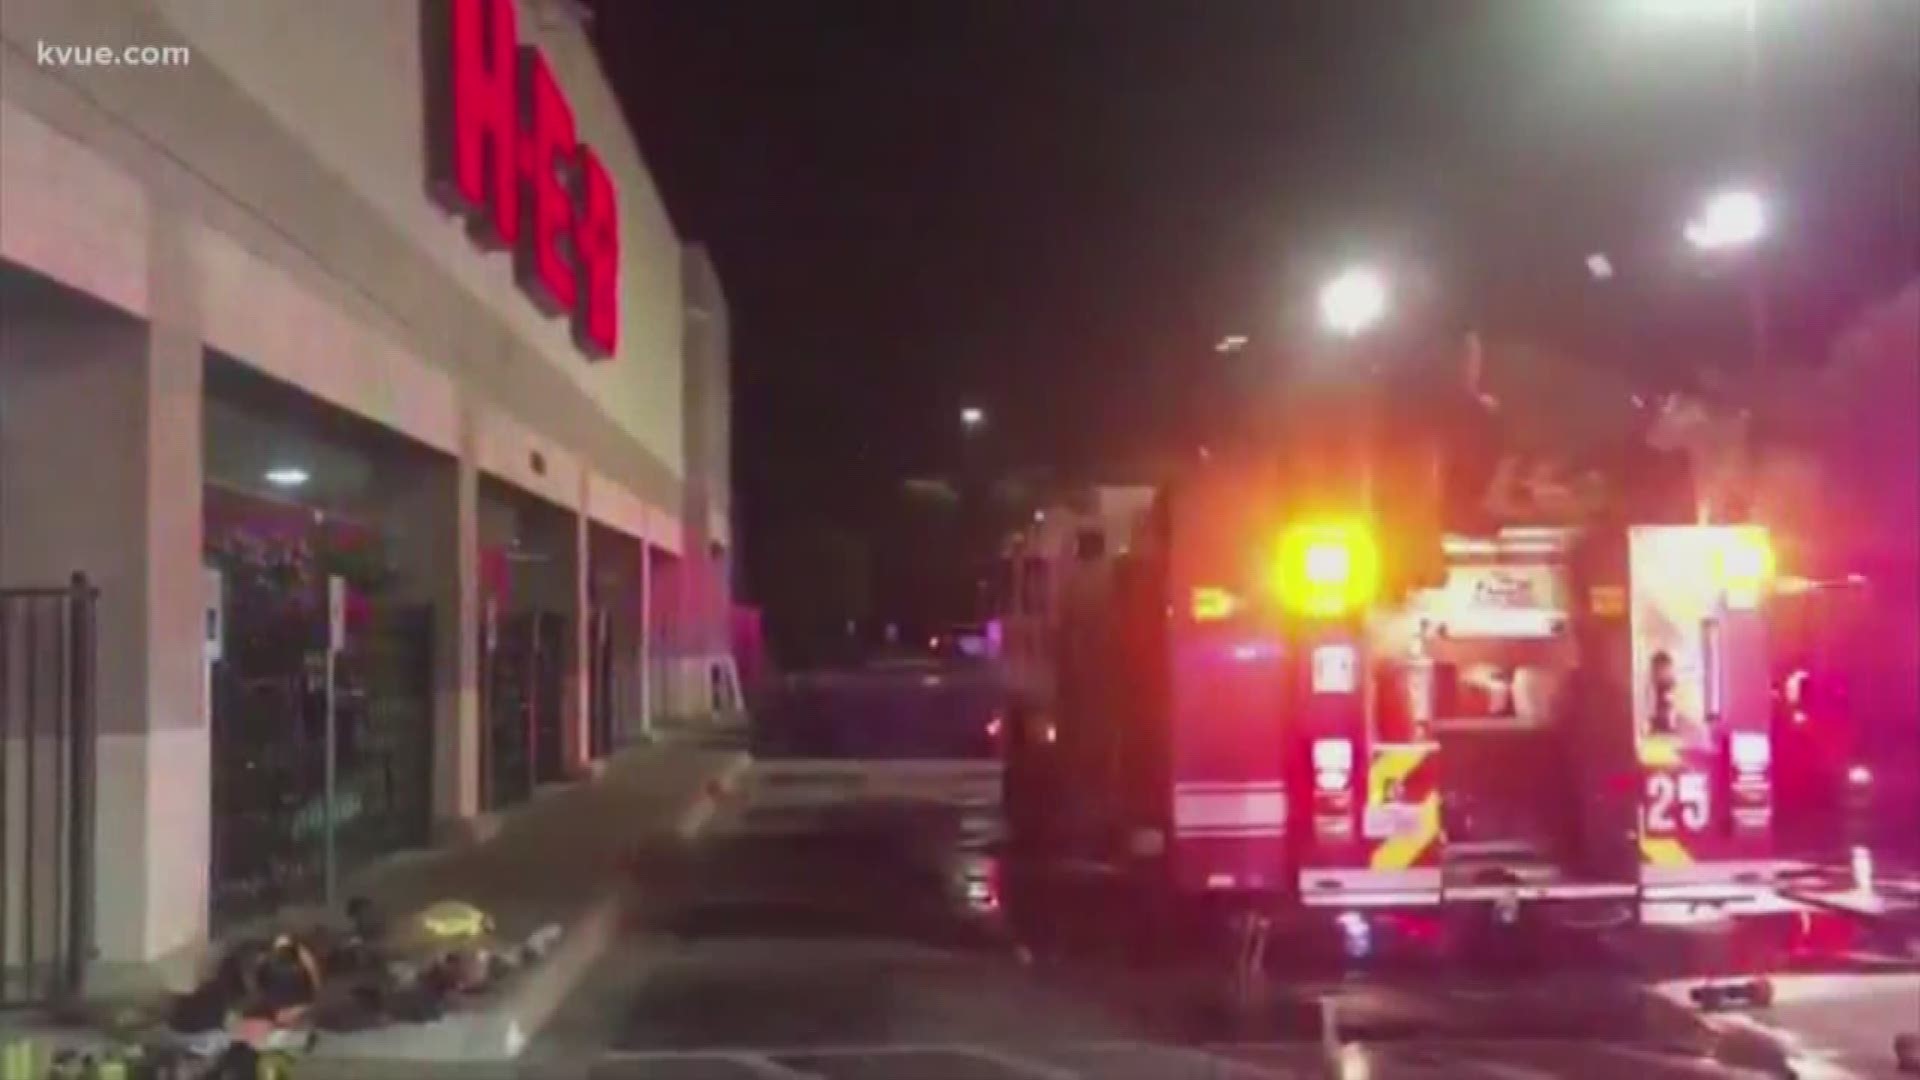 H-E-B has confirmed that one of their stores located in North Austin will be closed Monday after the store experienced a fire late Sunday night.